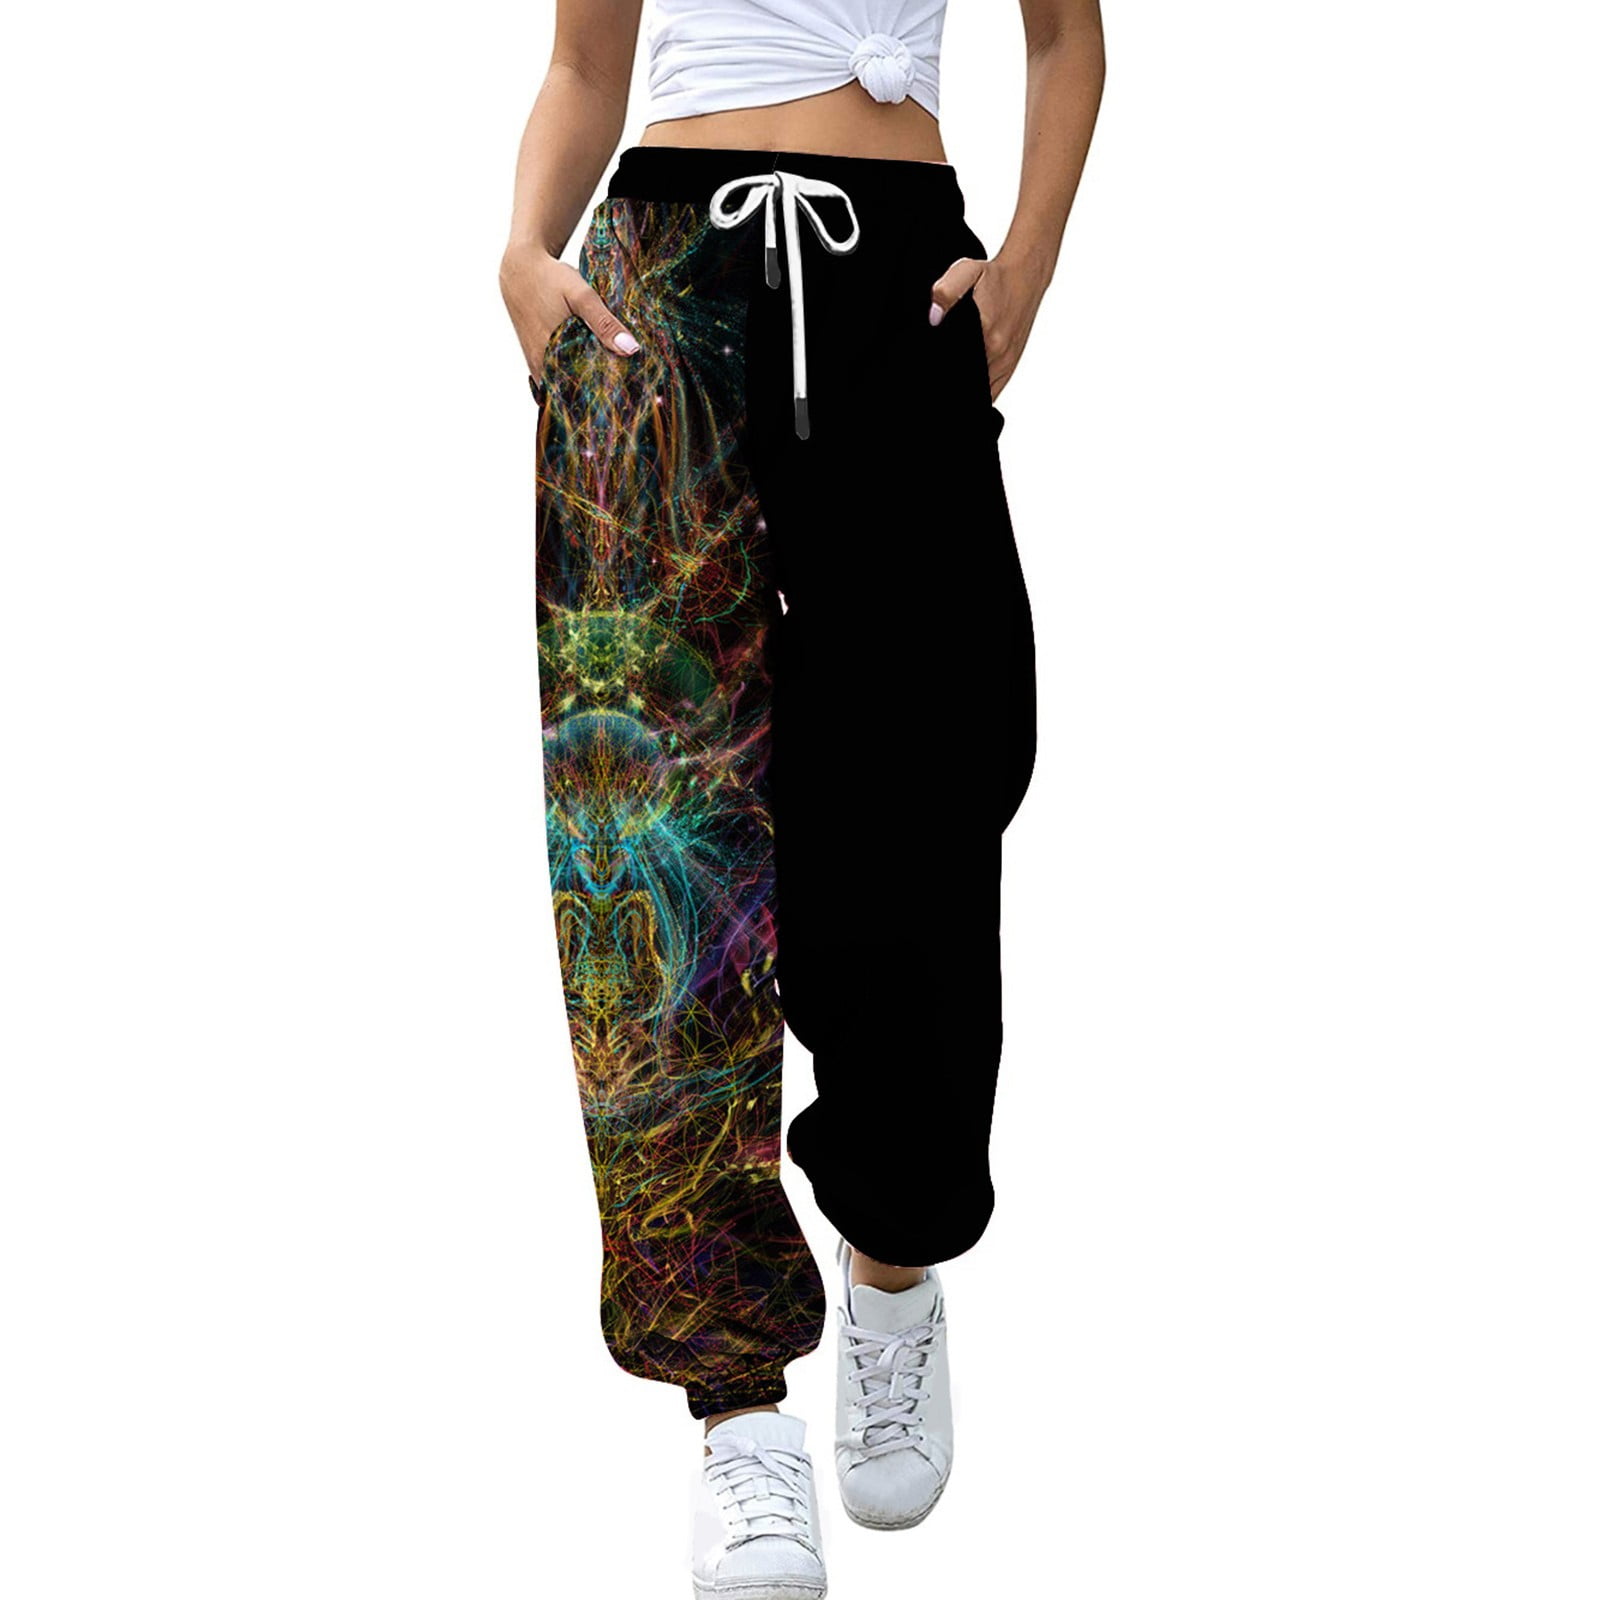 Cindysus Womens Cinch Bottom Sweatpants High Waisted Athletic Workout  Joggers Lounge Pants Activewear with Pockets White XL